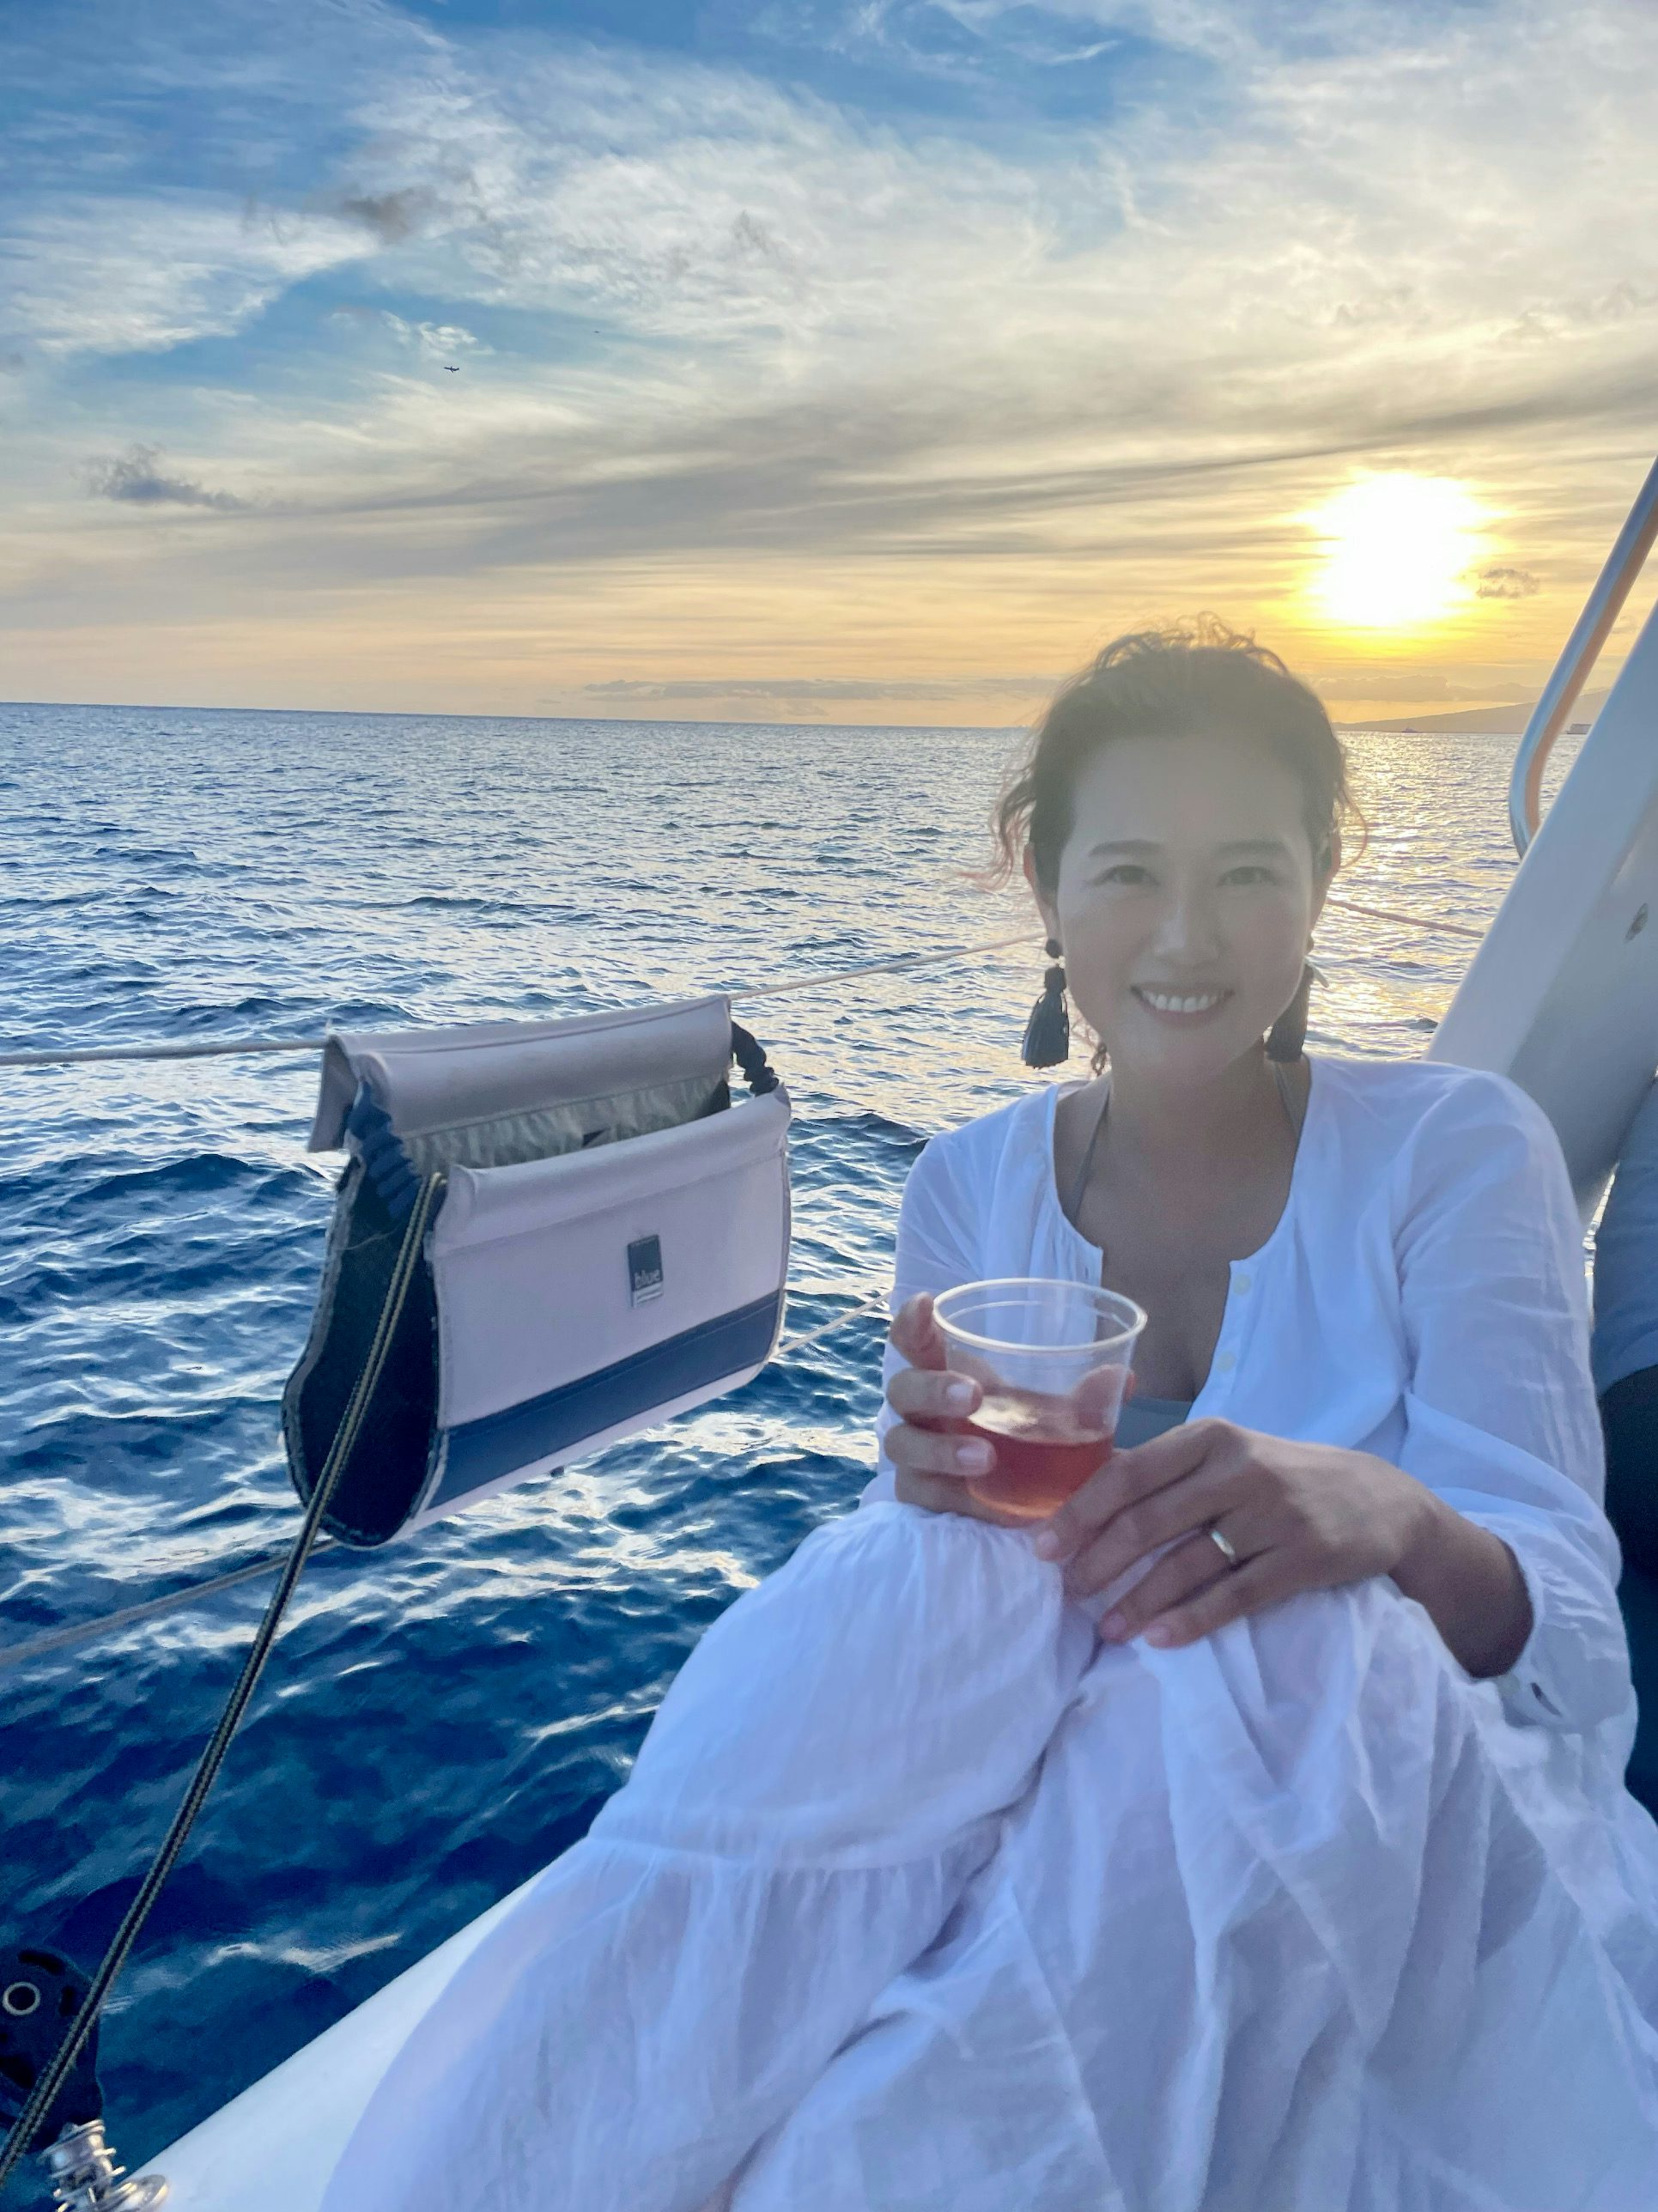 Jini Cho wearing white dress and holding drink in front of the sunset